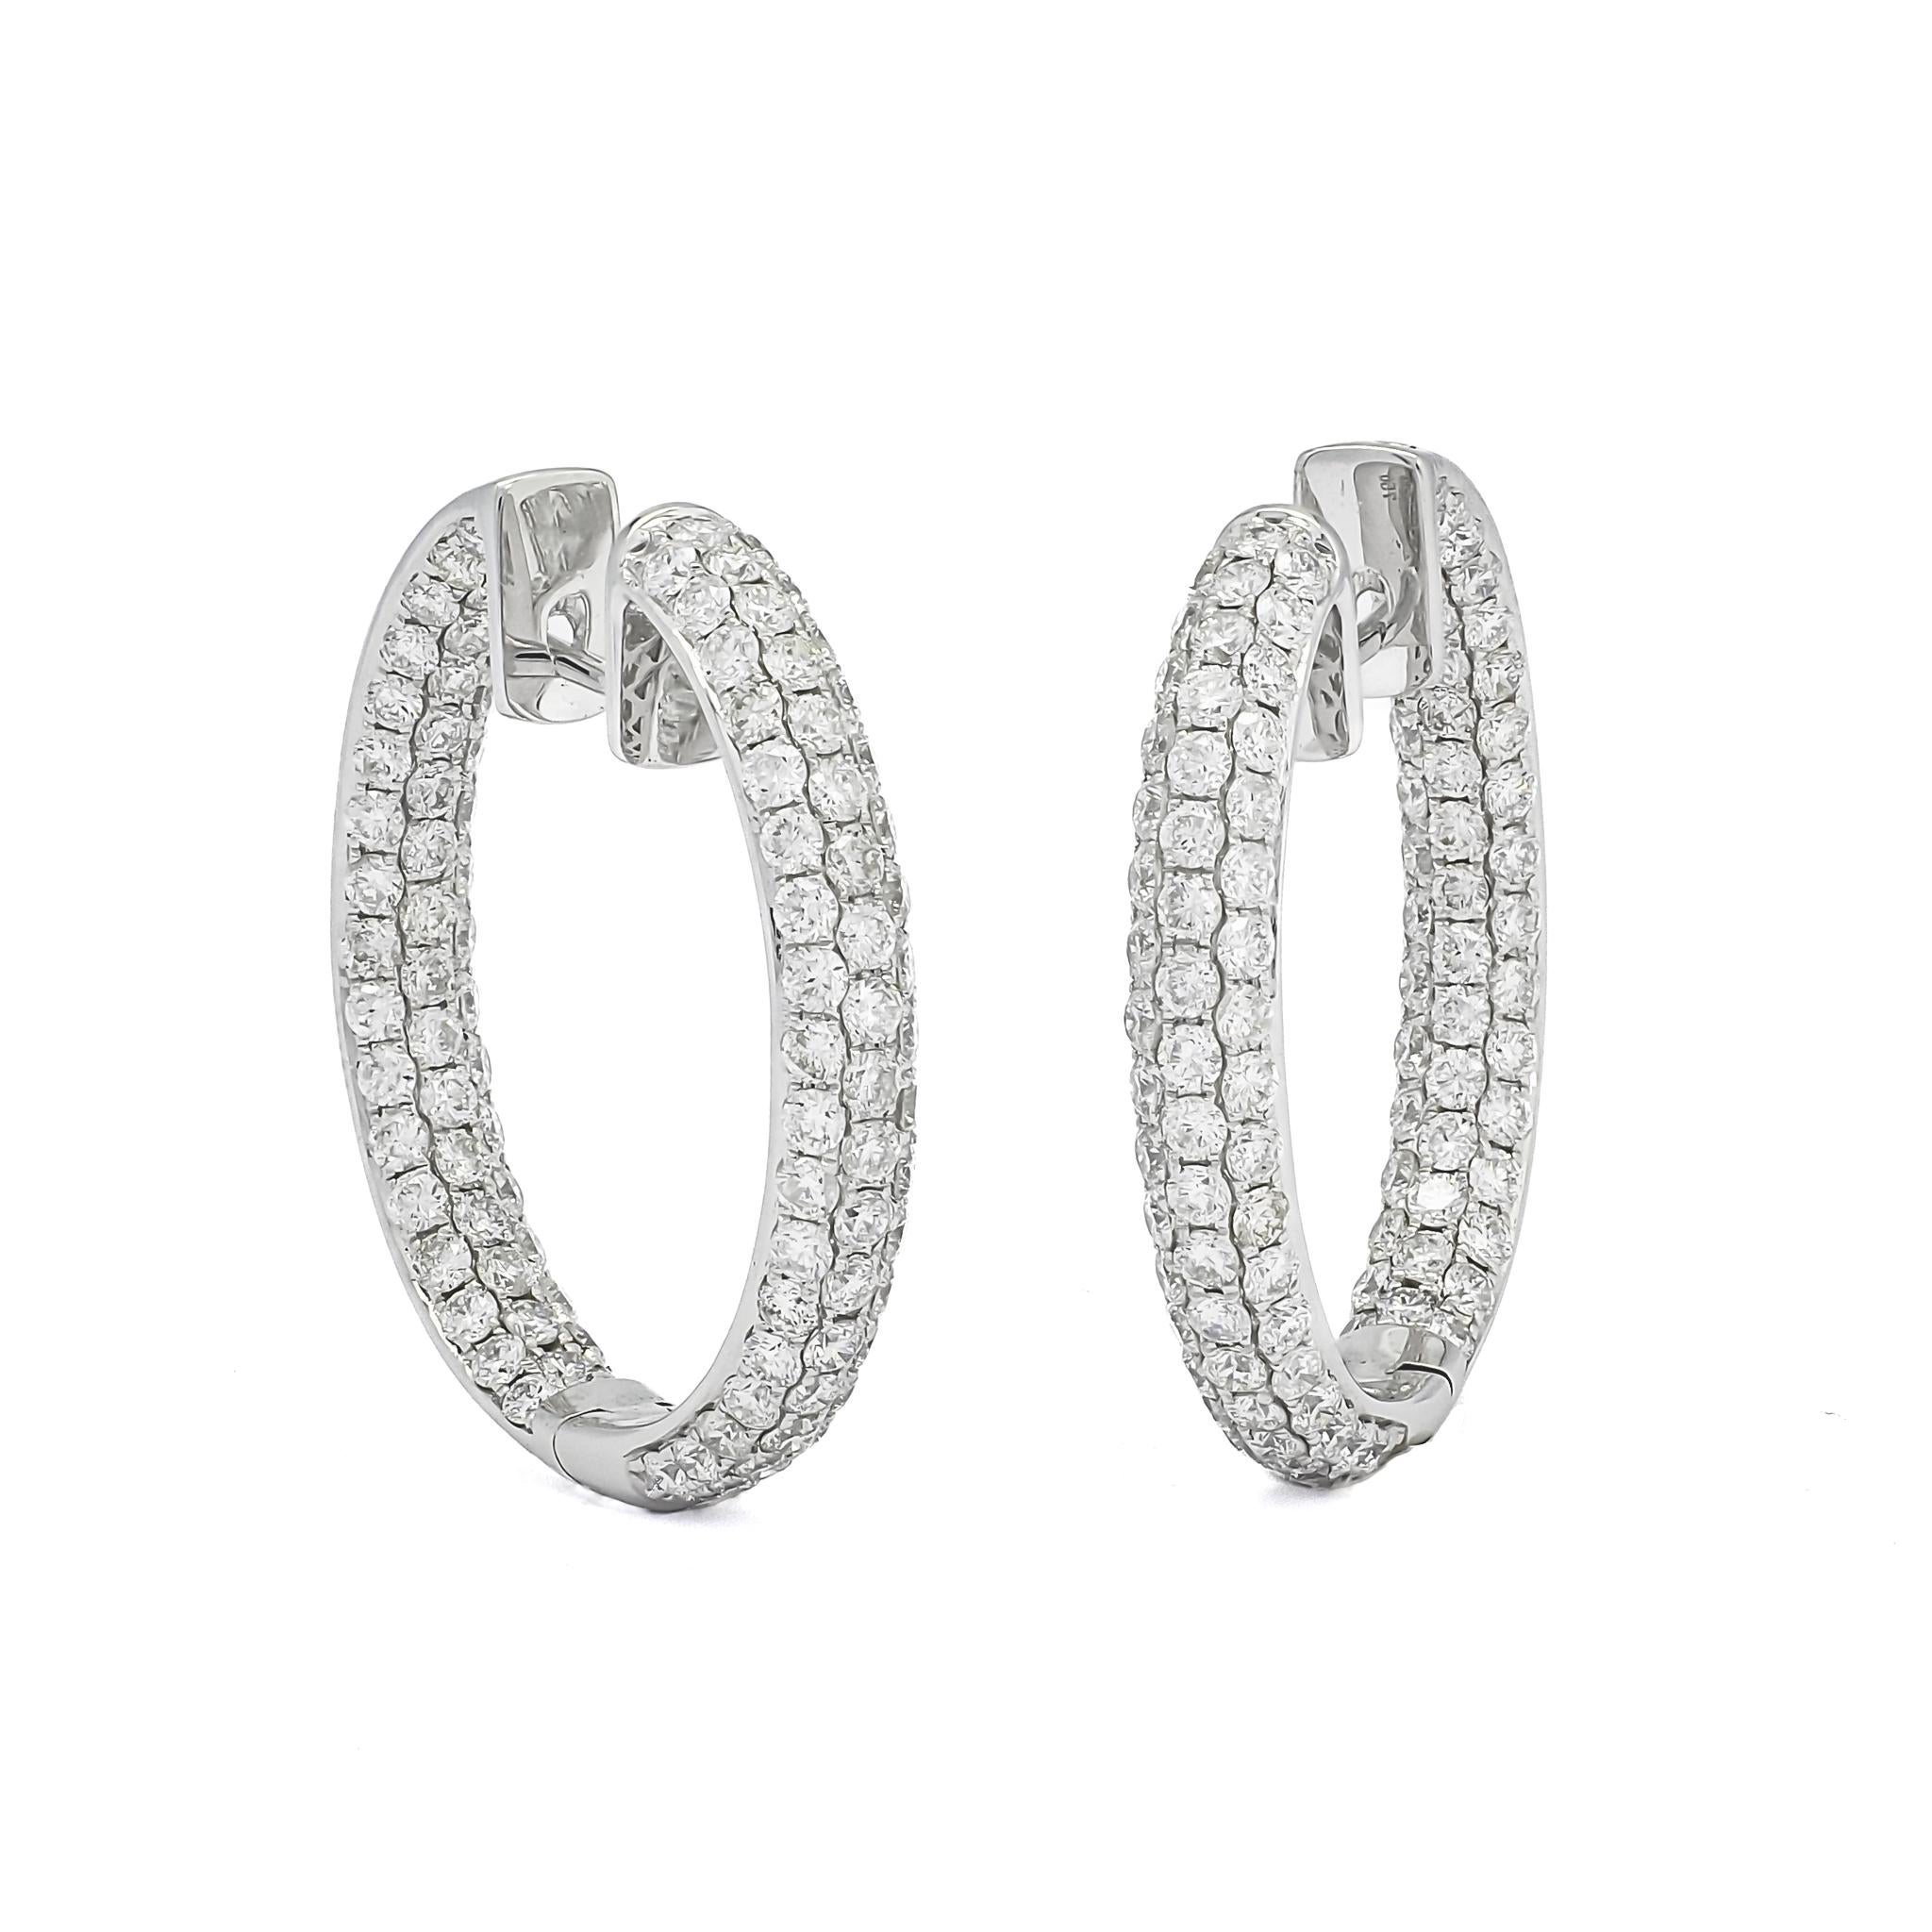 Presenting the 18KT White Gold Natural Diamonds In and Out 3 Row Hoop Earrings - a spectacular fusion of elegance, luxury, and sophistication. These earrings are the epitome of high-end jewelry design, sure to capture the heart of any woman who